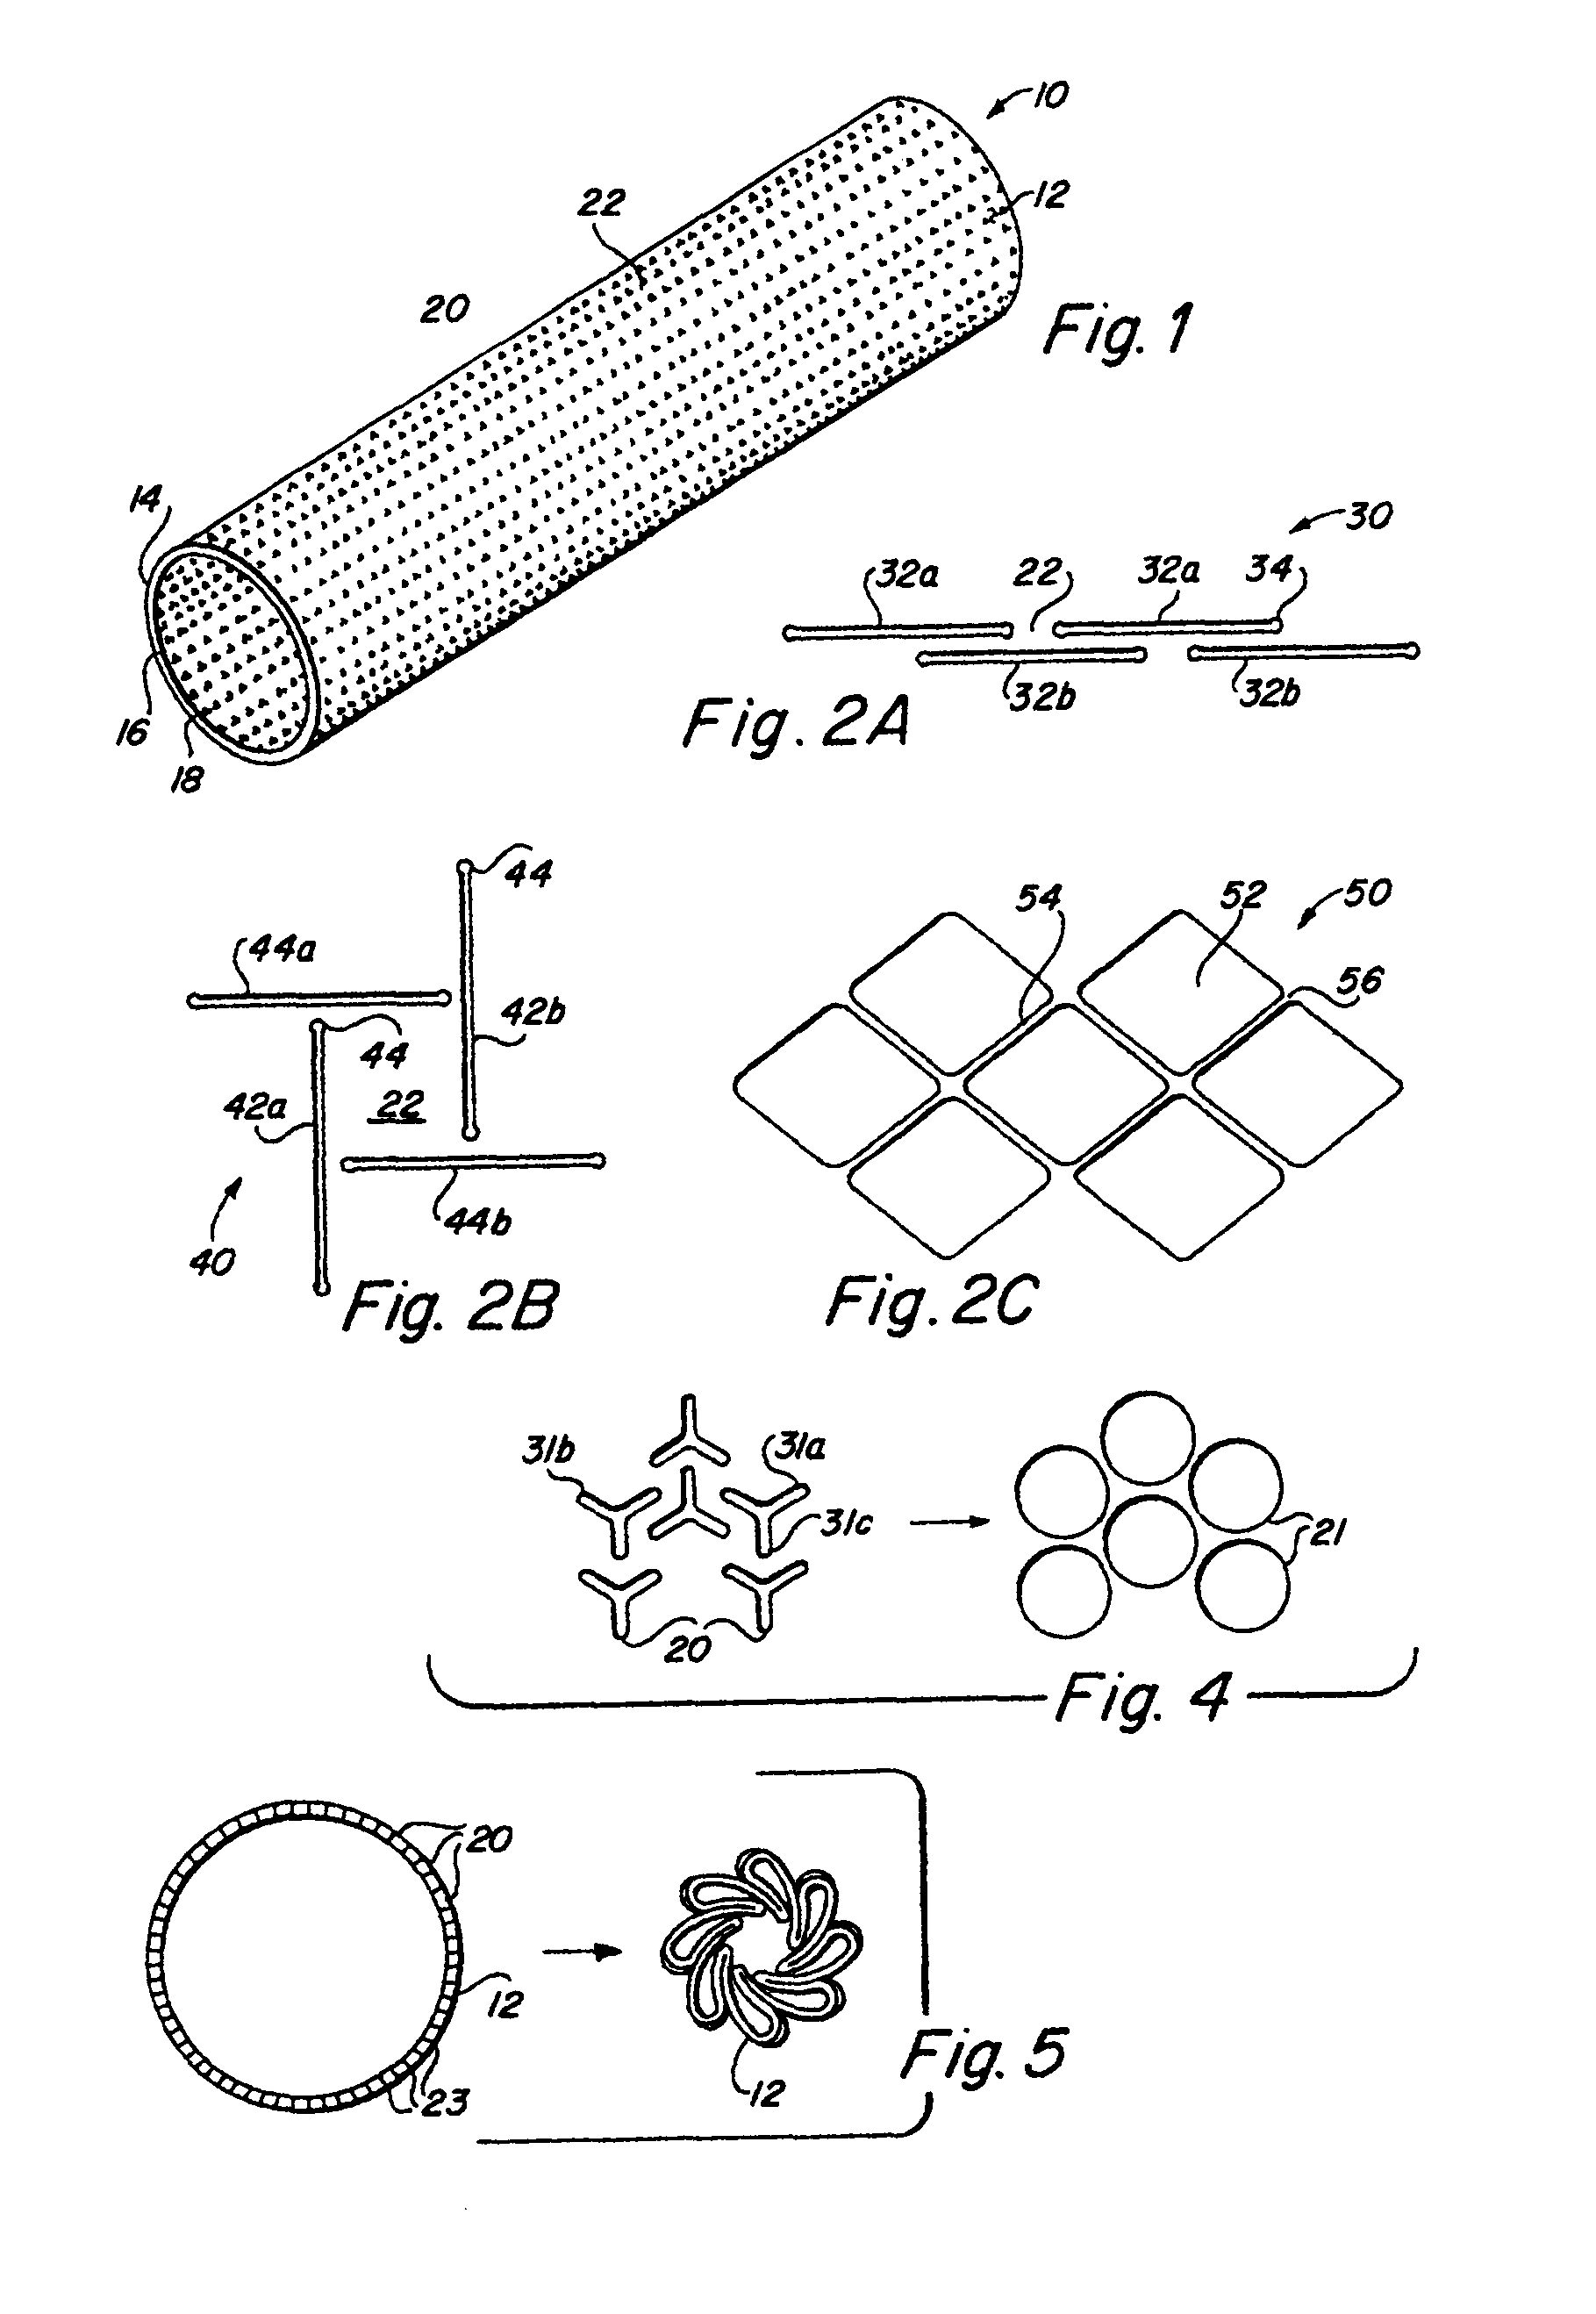 Complaint implantable medical devices and methods of making same